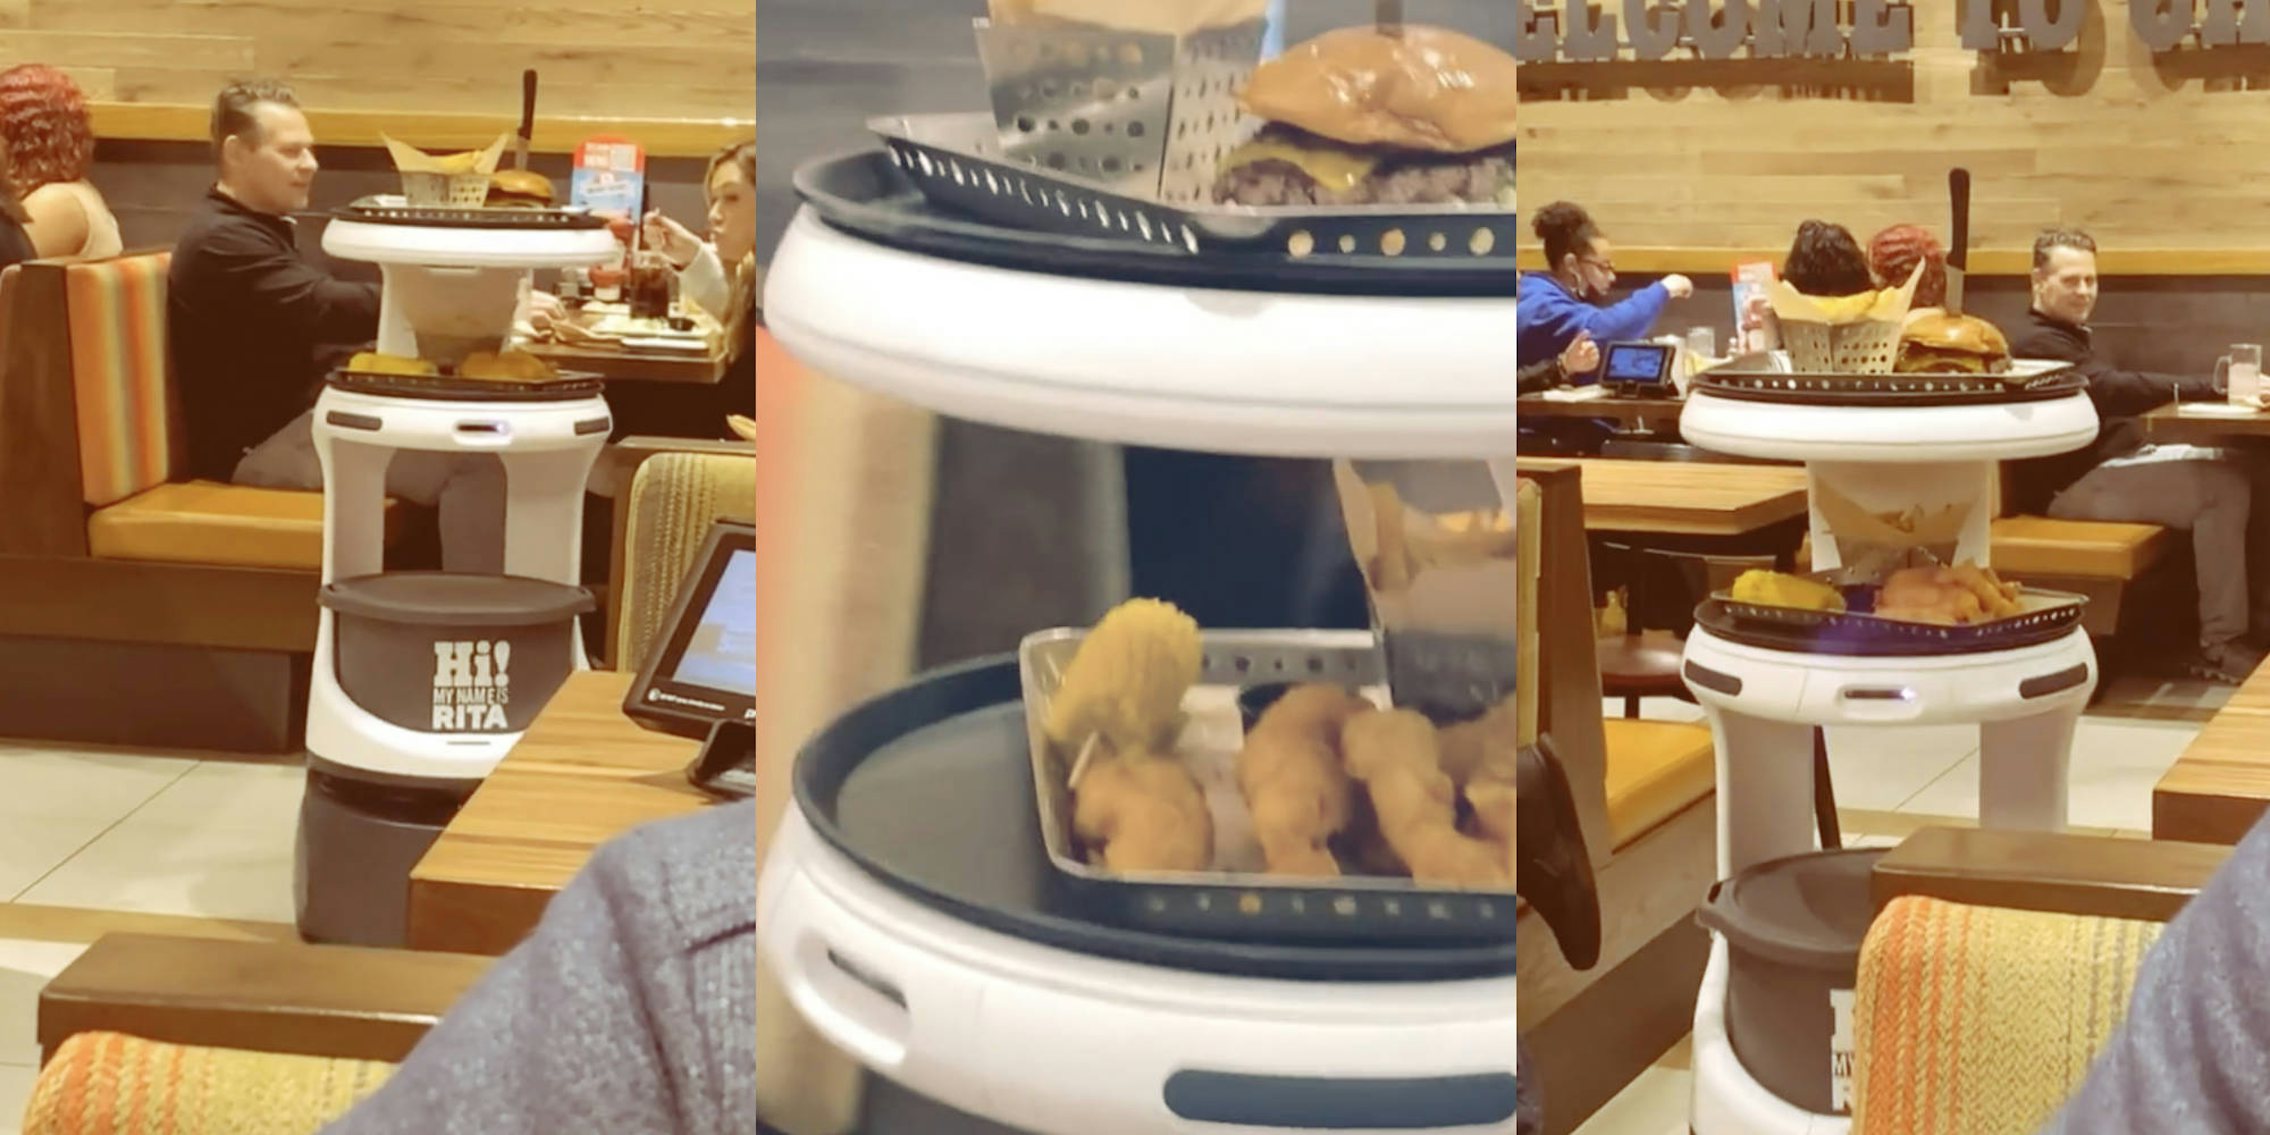 three photos of an automatic serving robot making its way across a restaurant floor